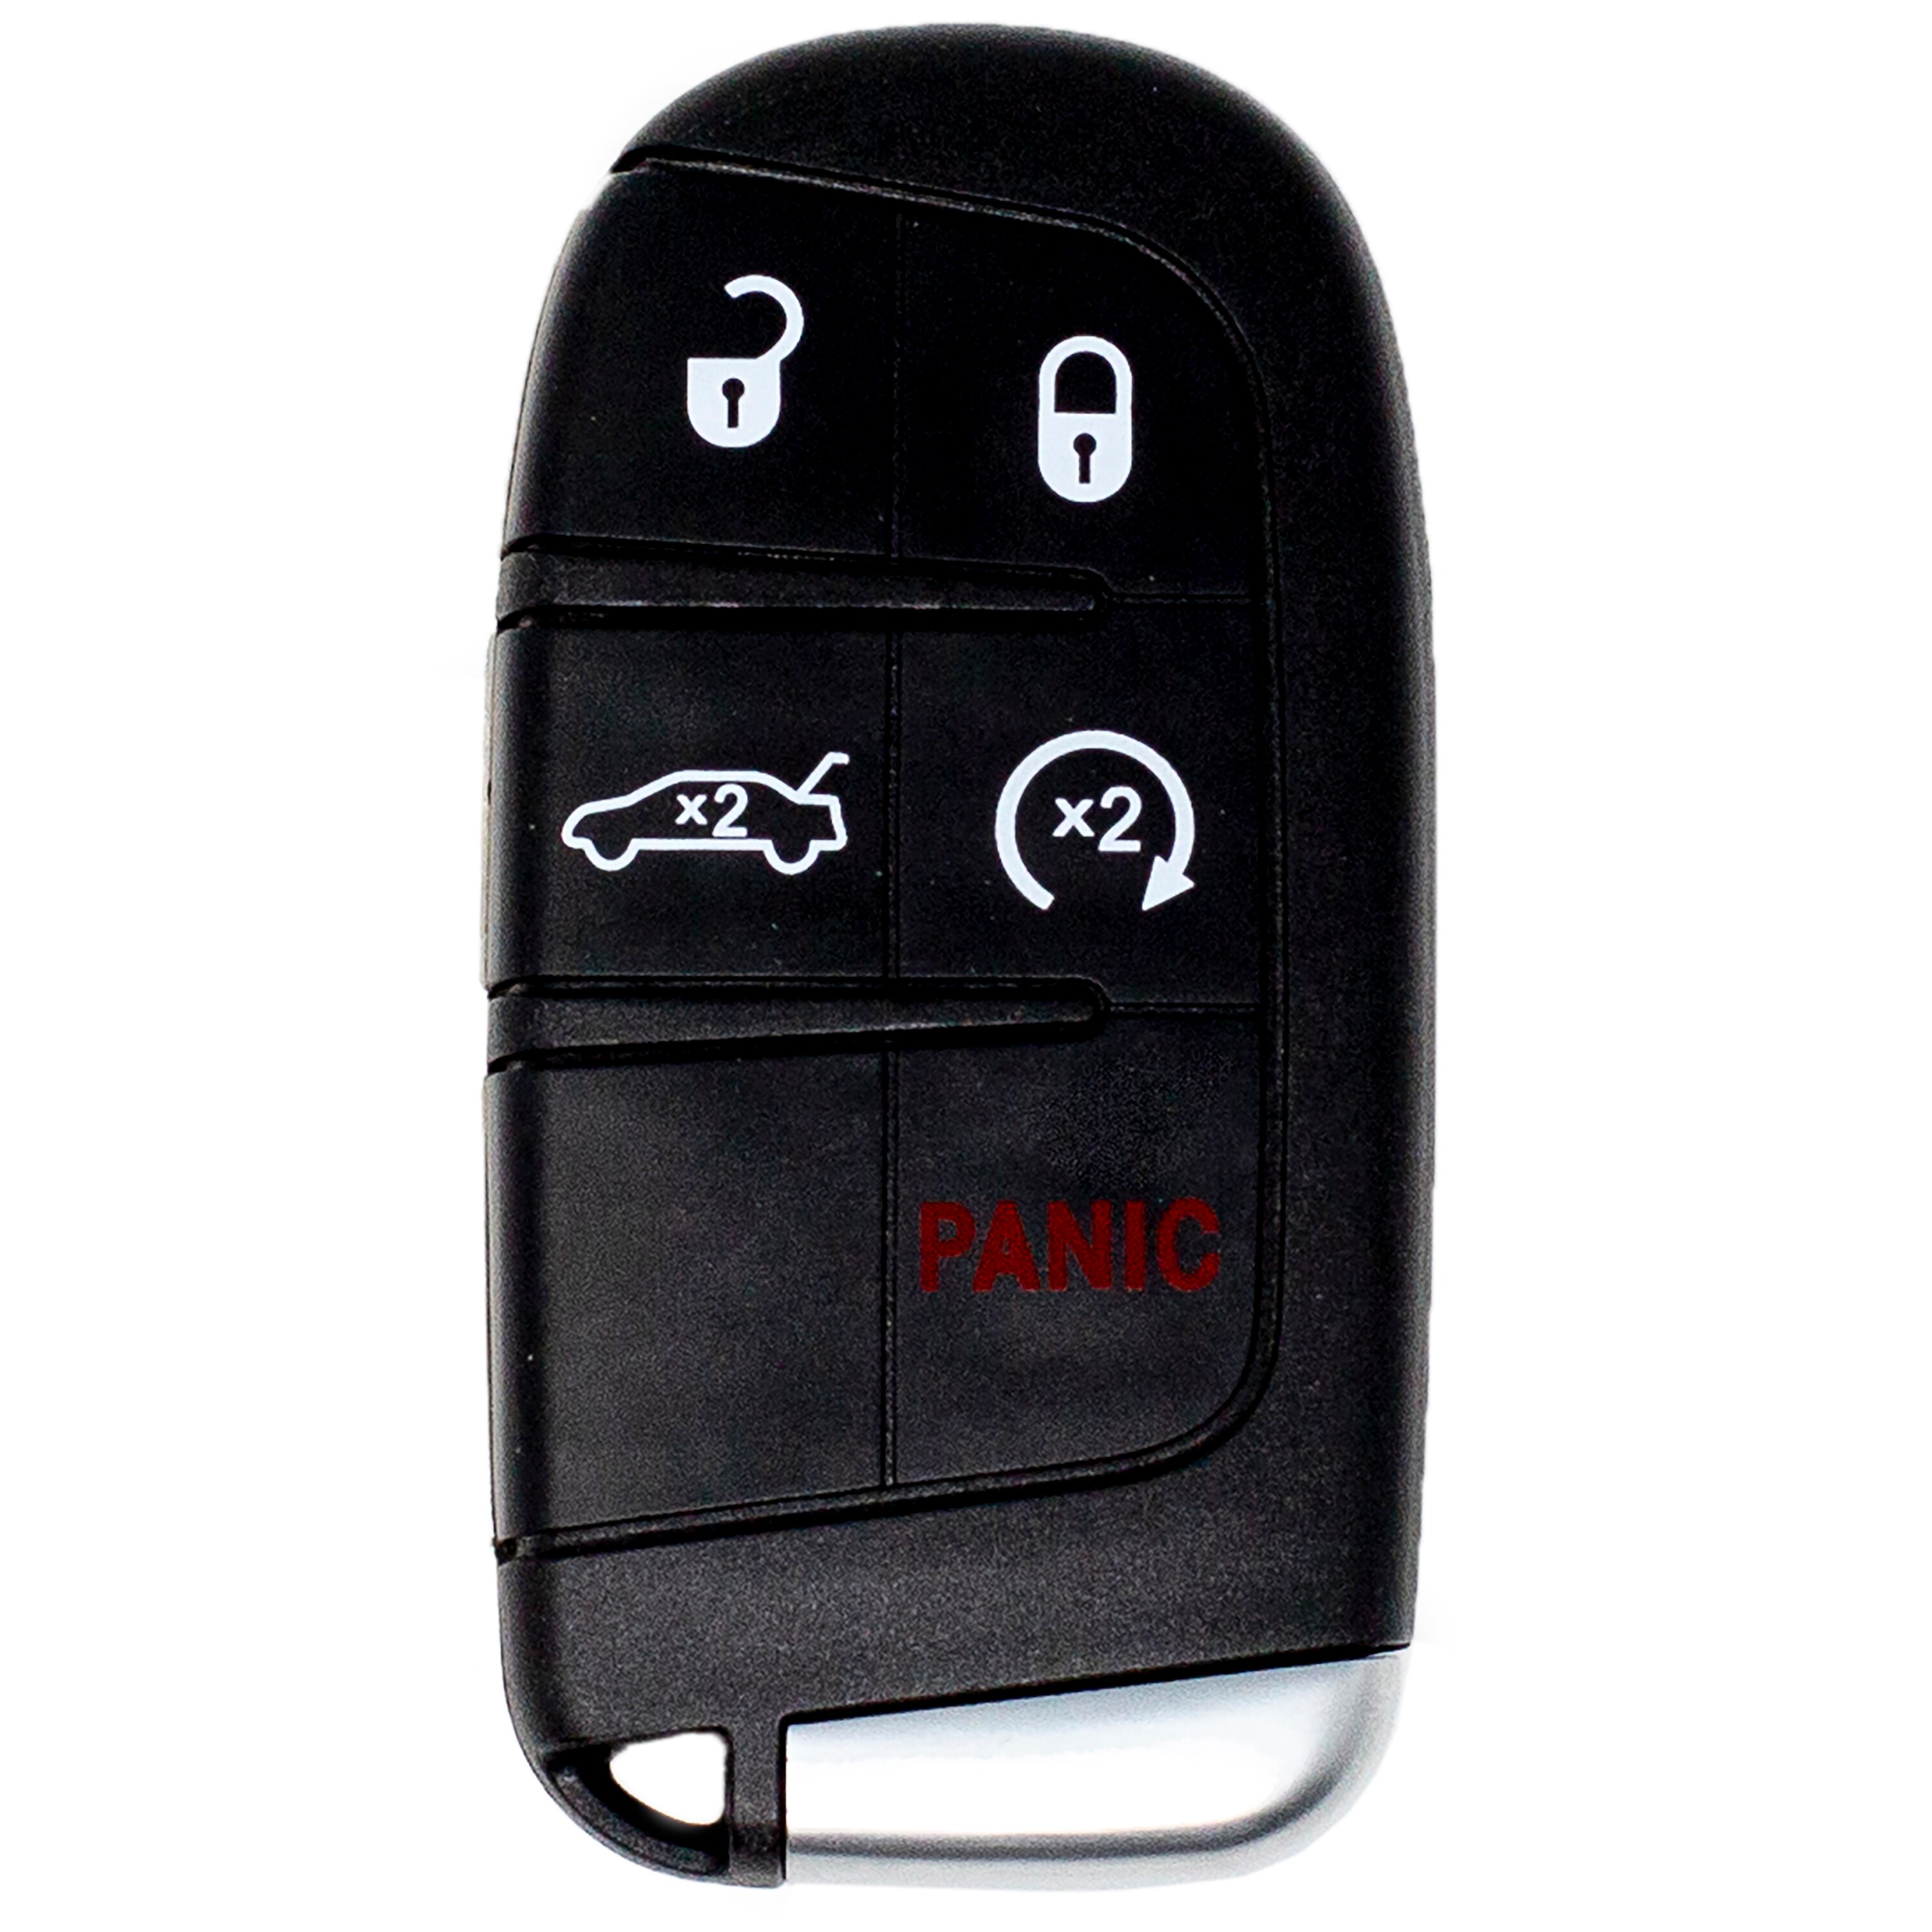 Car Keys Express Aftermarket Replacement OEM Remote Key for Chrysler/Dodge/Jeep with Remote Start 4 Button